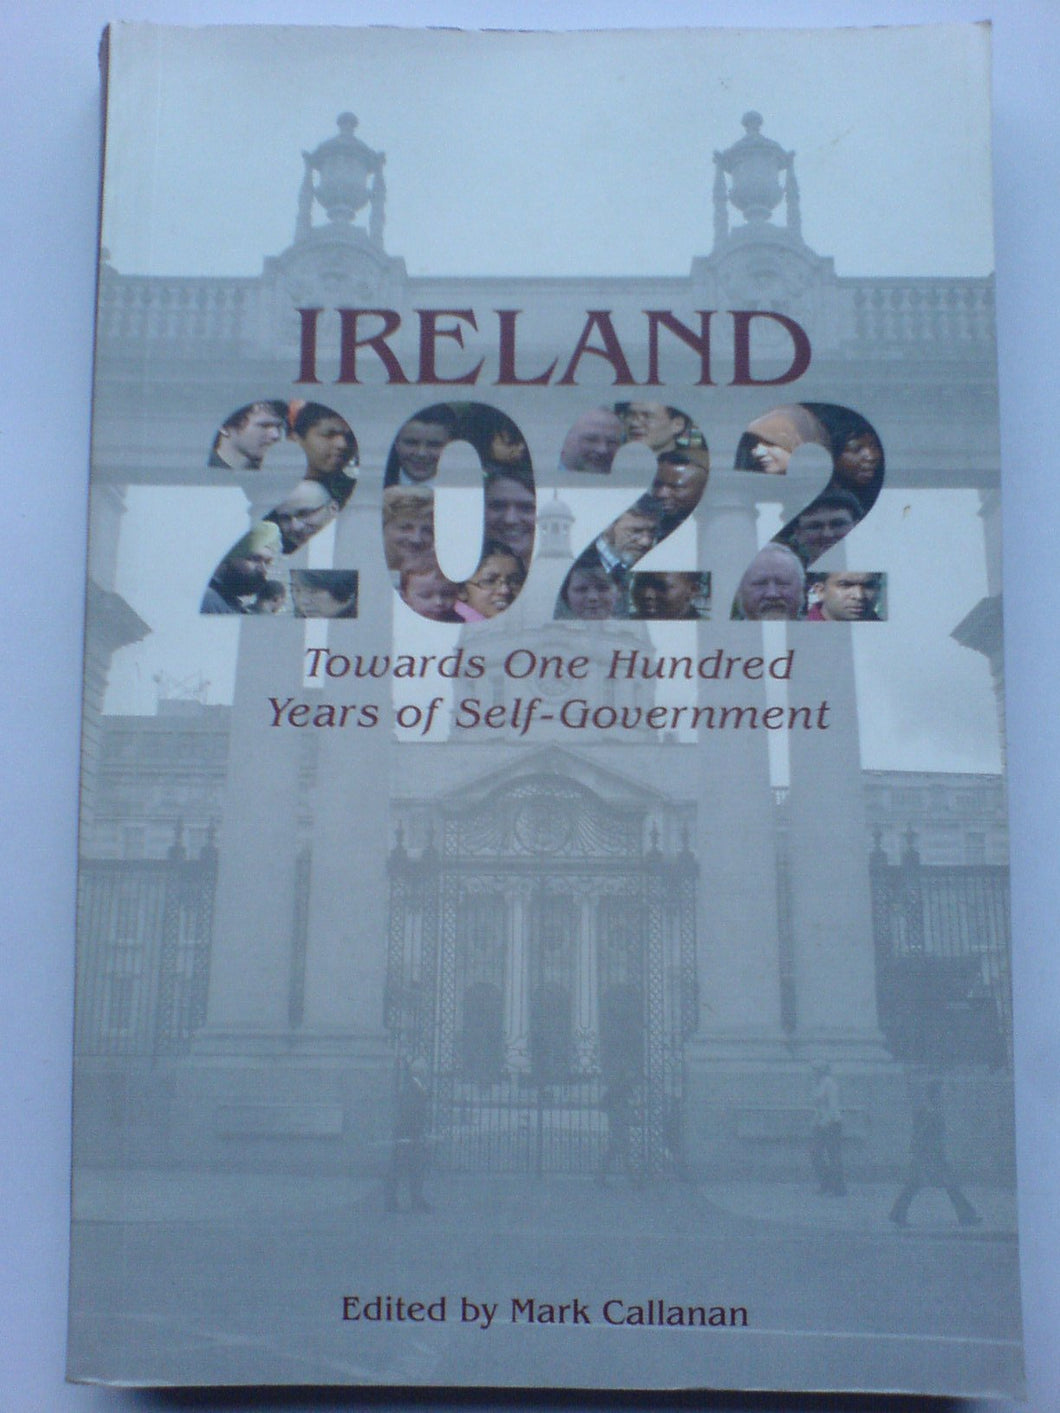 Ireland 2022: Towards One Hundred Years of Self-Government